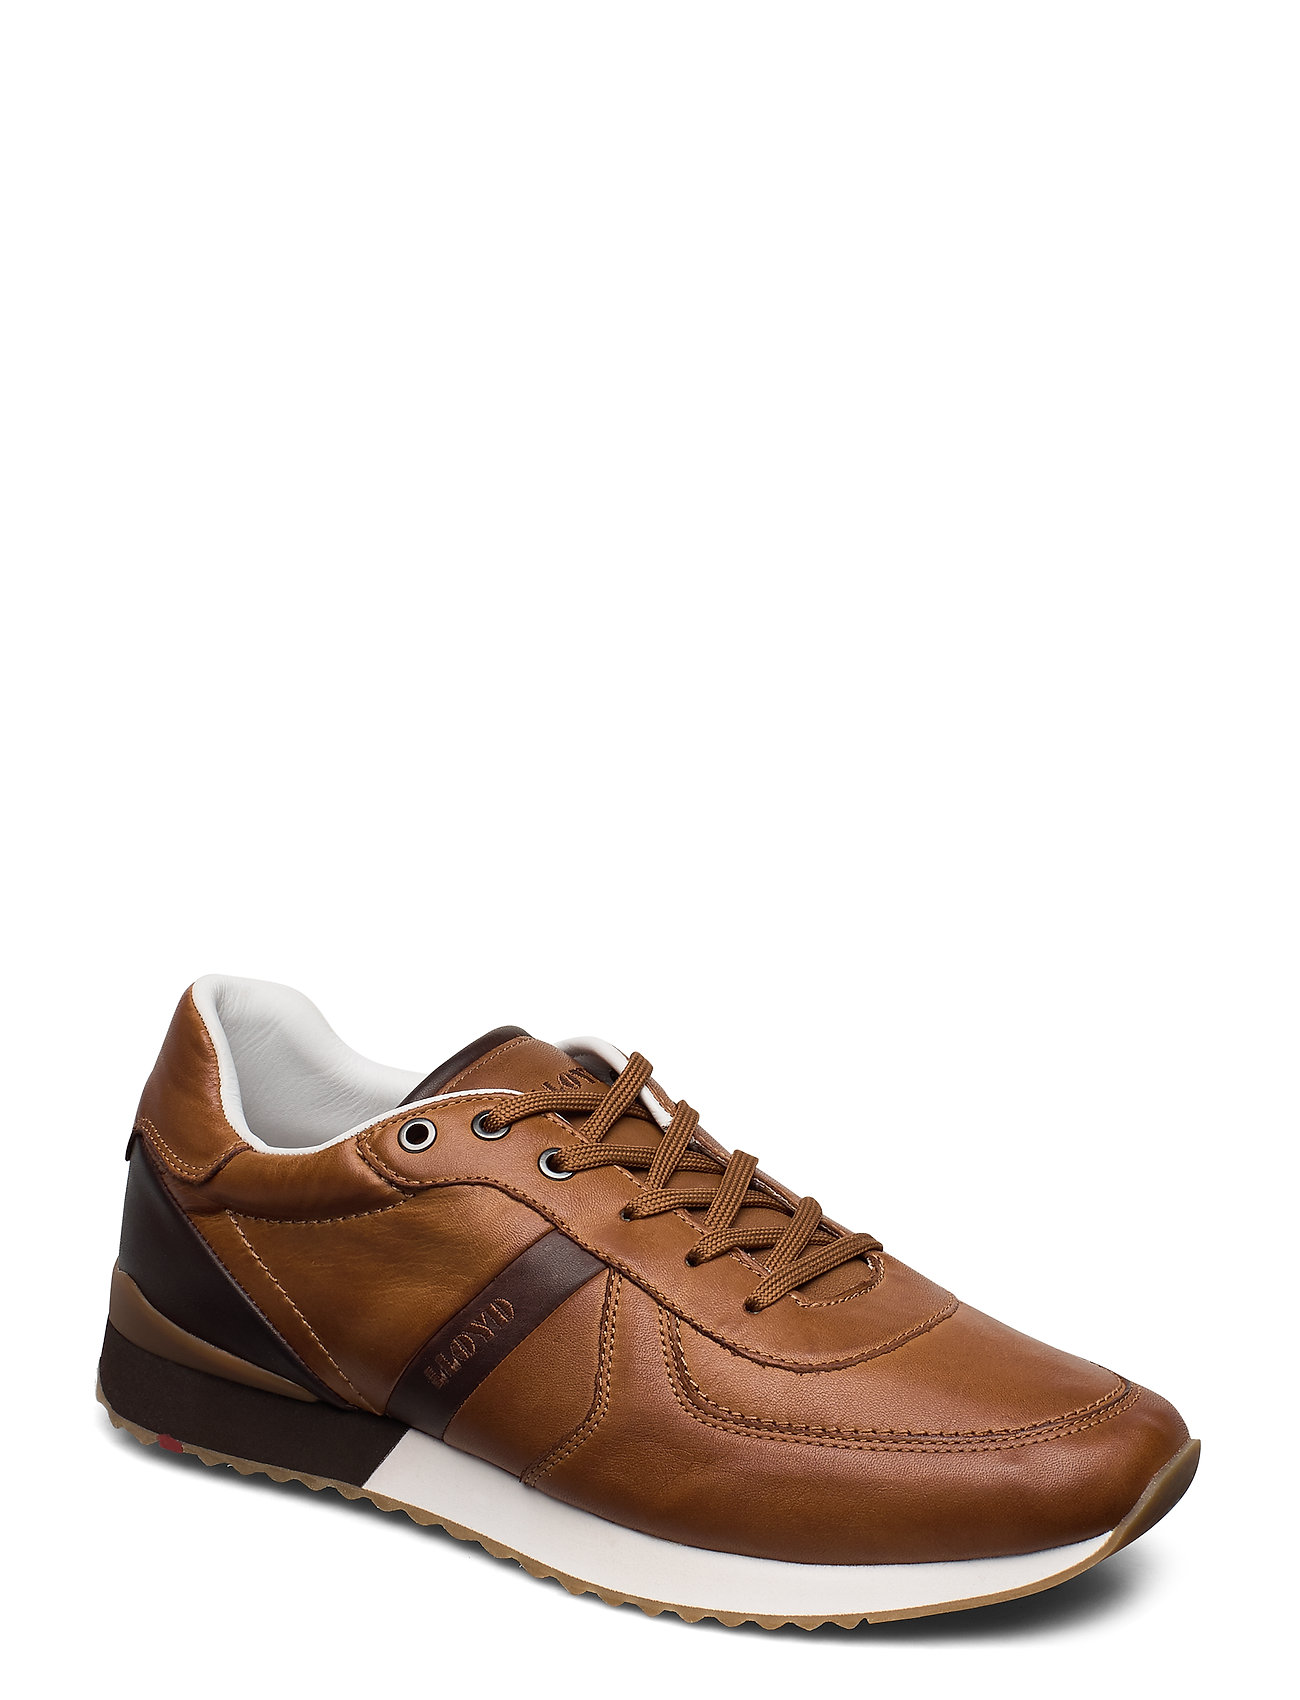 1 - NEW NATURE/COFFEE Lloyd Earland Low-top Sneakers Brun Lloyd for herre - Pashion.dk